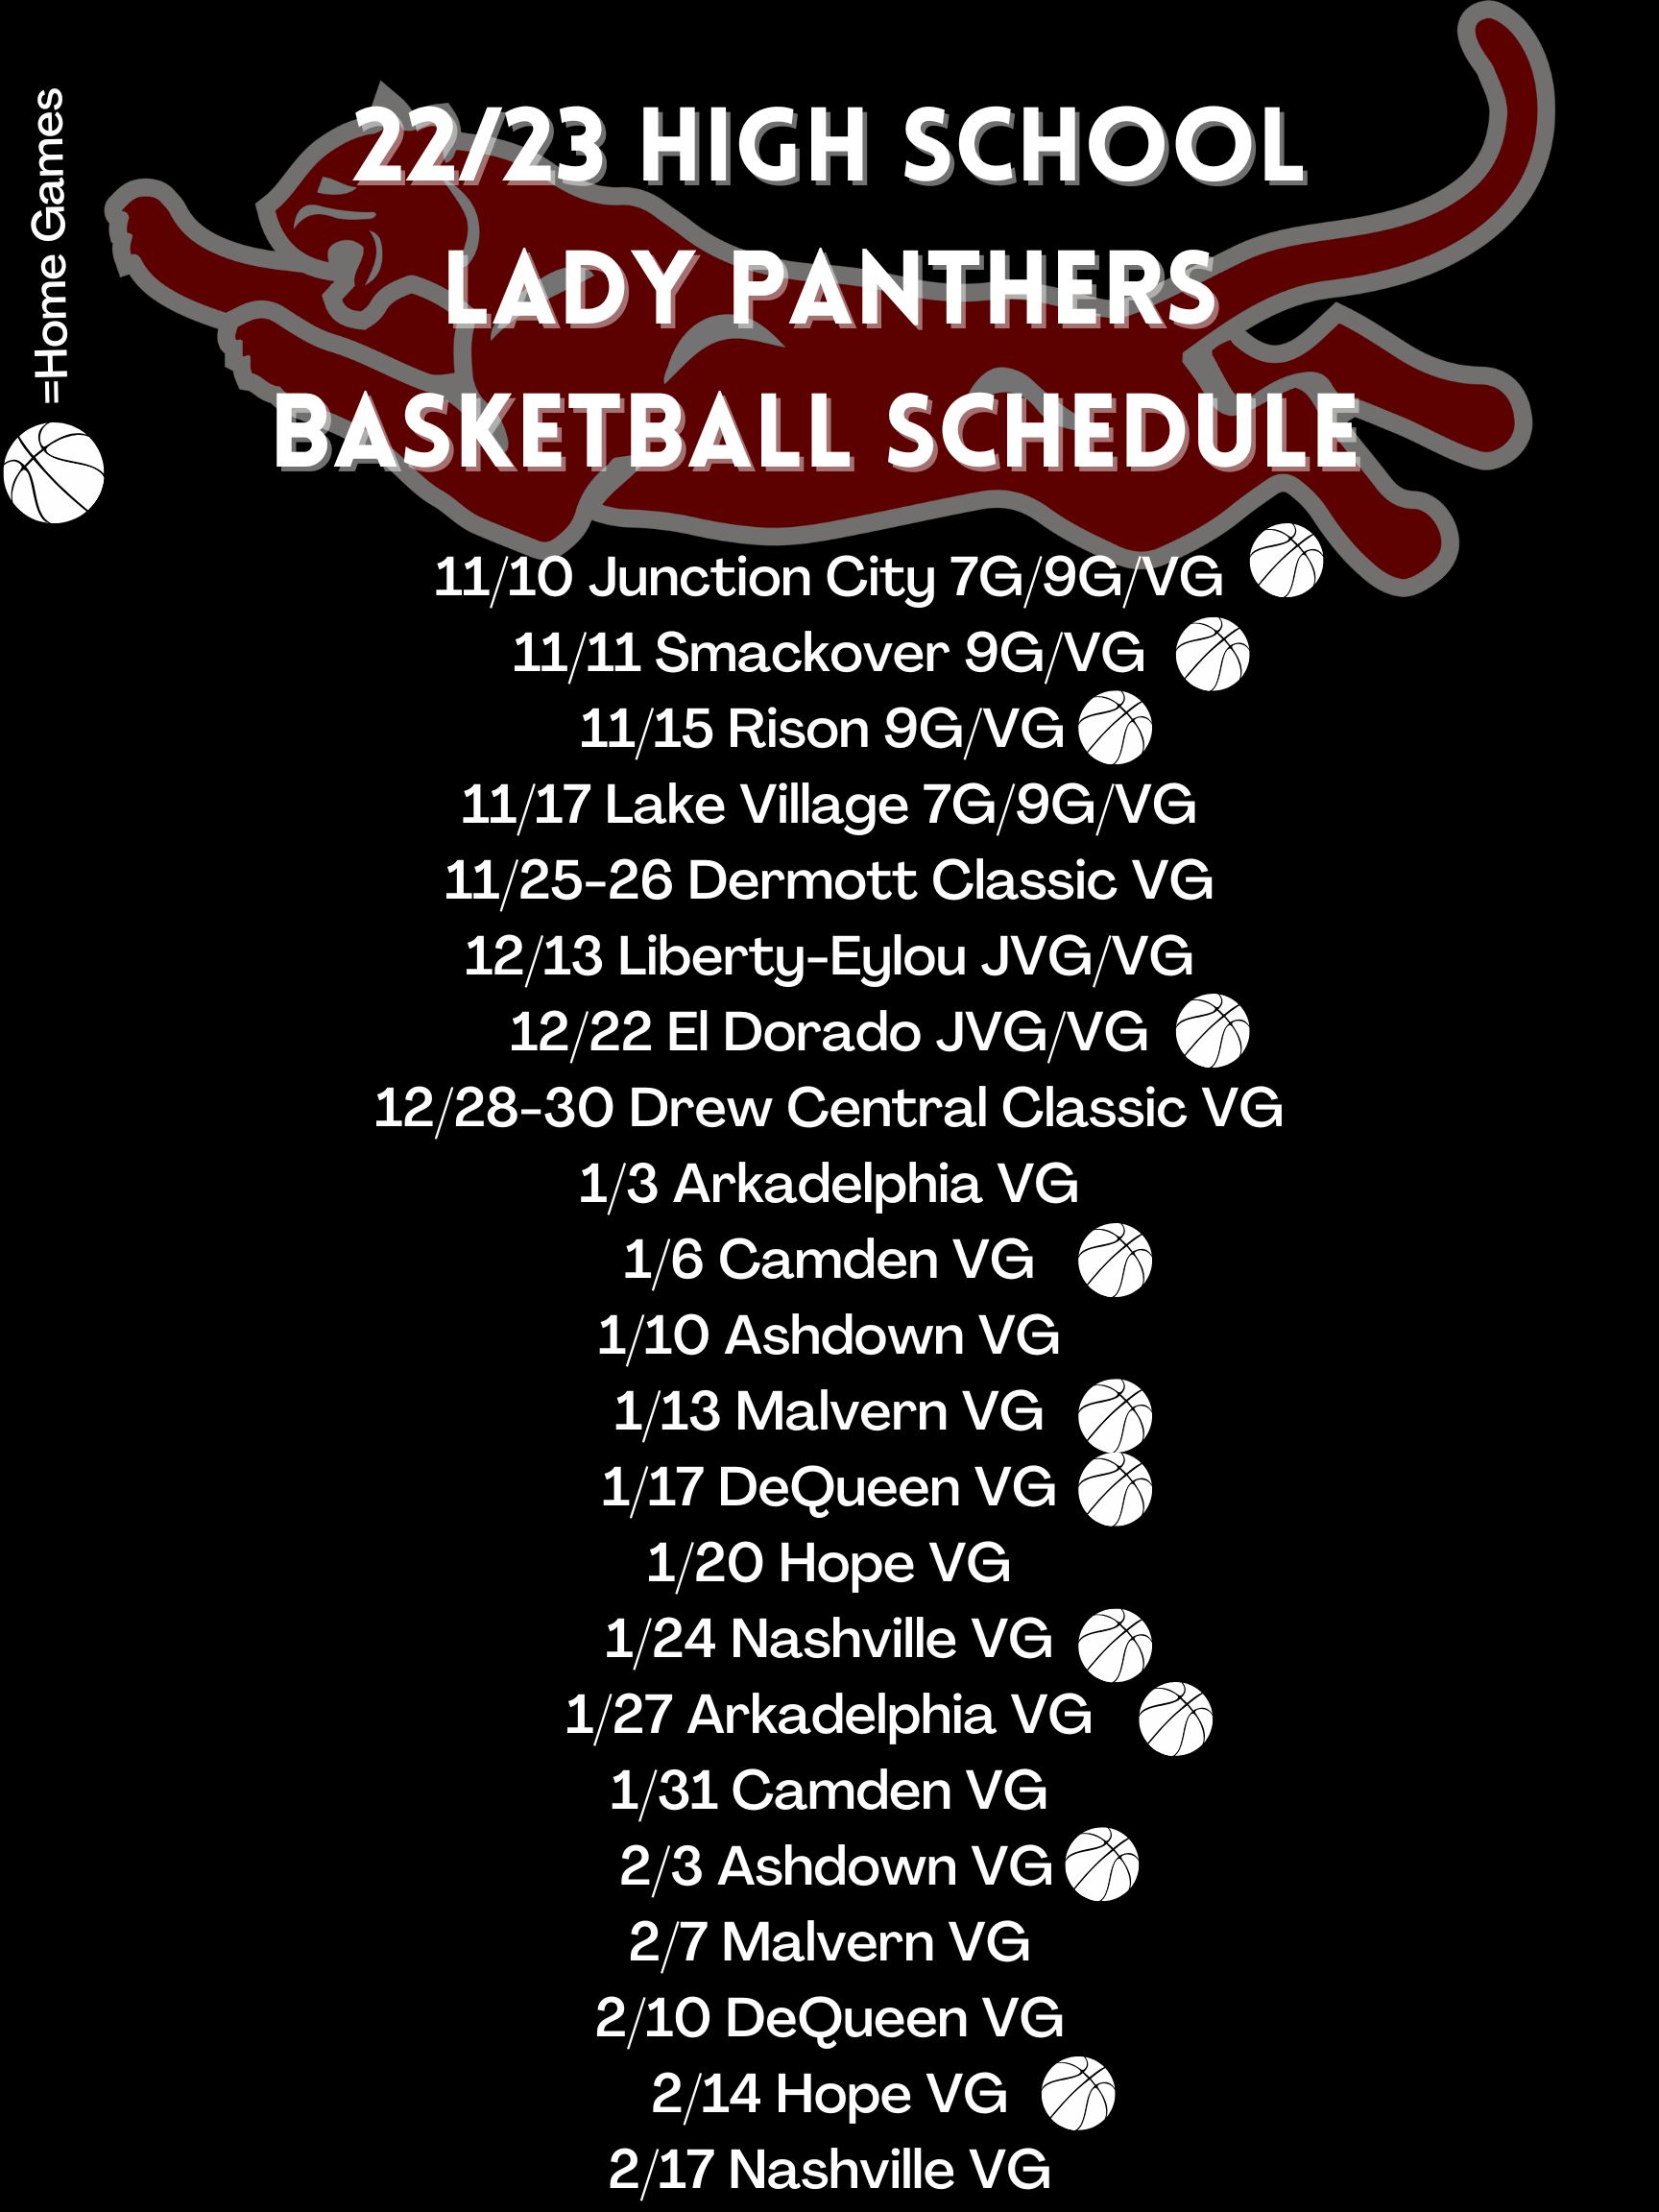 Lady Panther Basketball Schedule